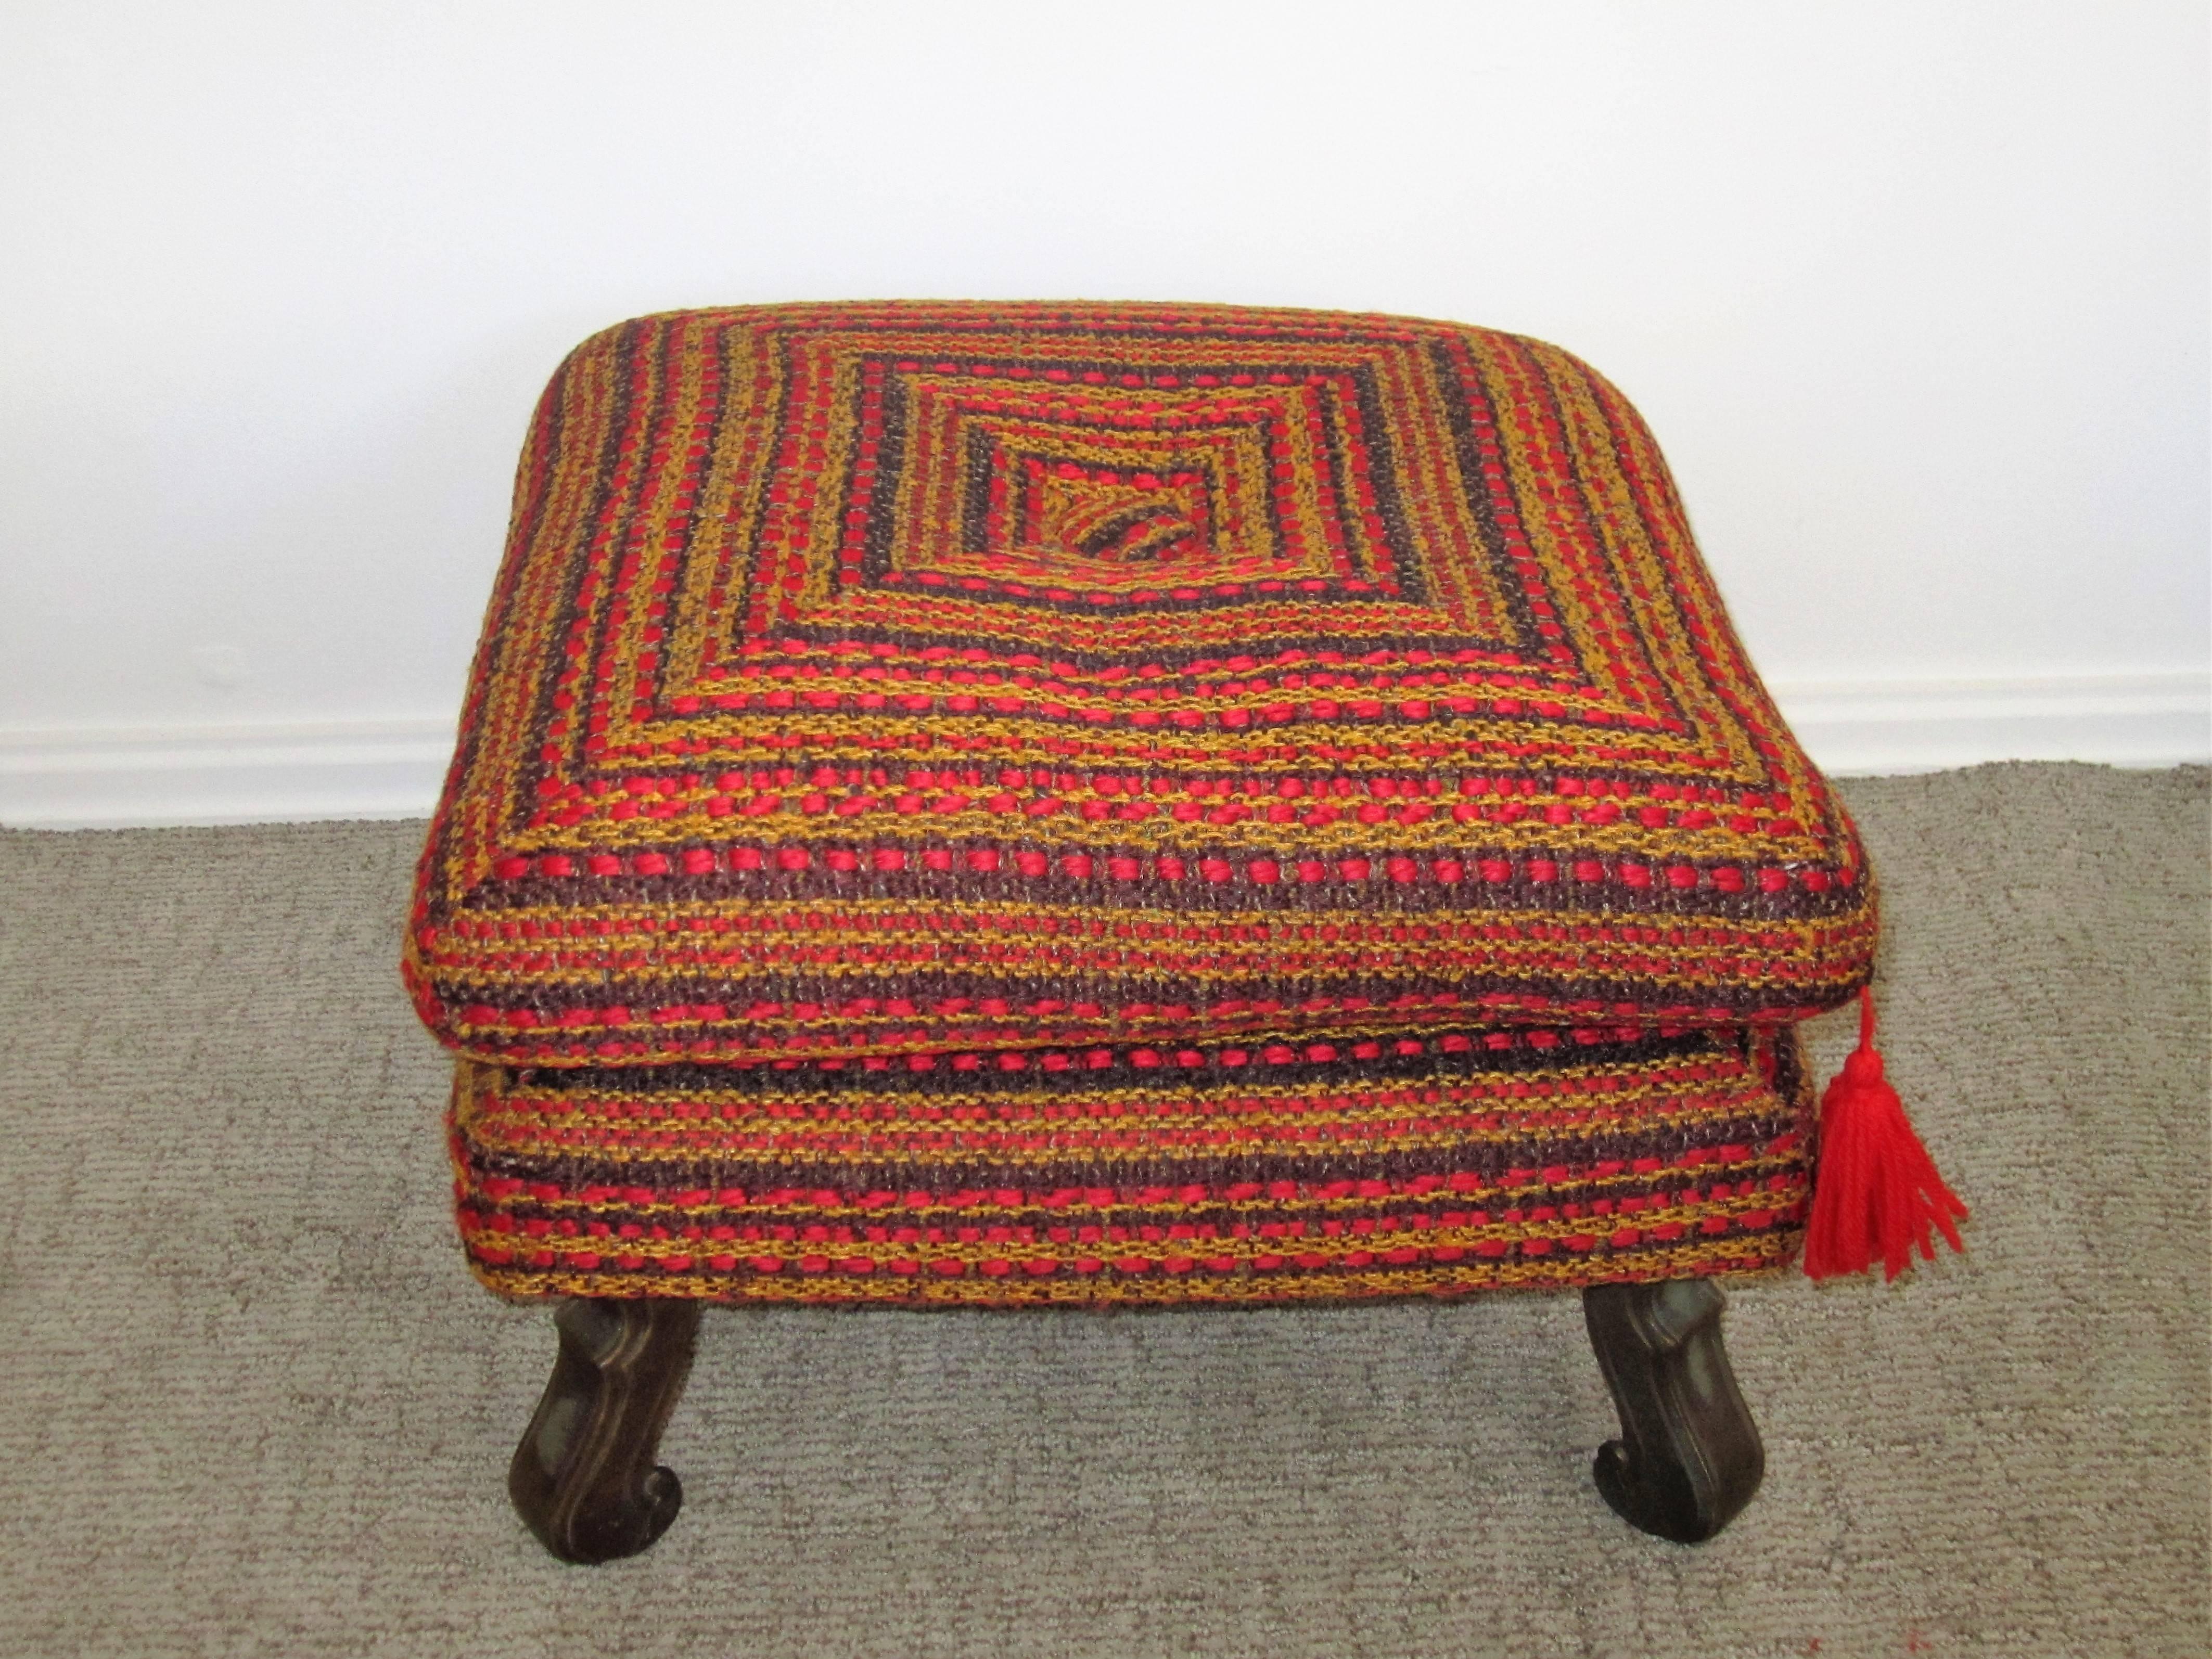 Unknown Midcentury Colorful Ottoman, Bench, or Stool